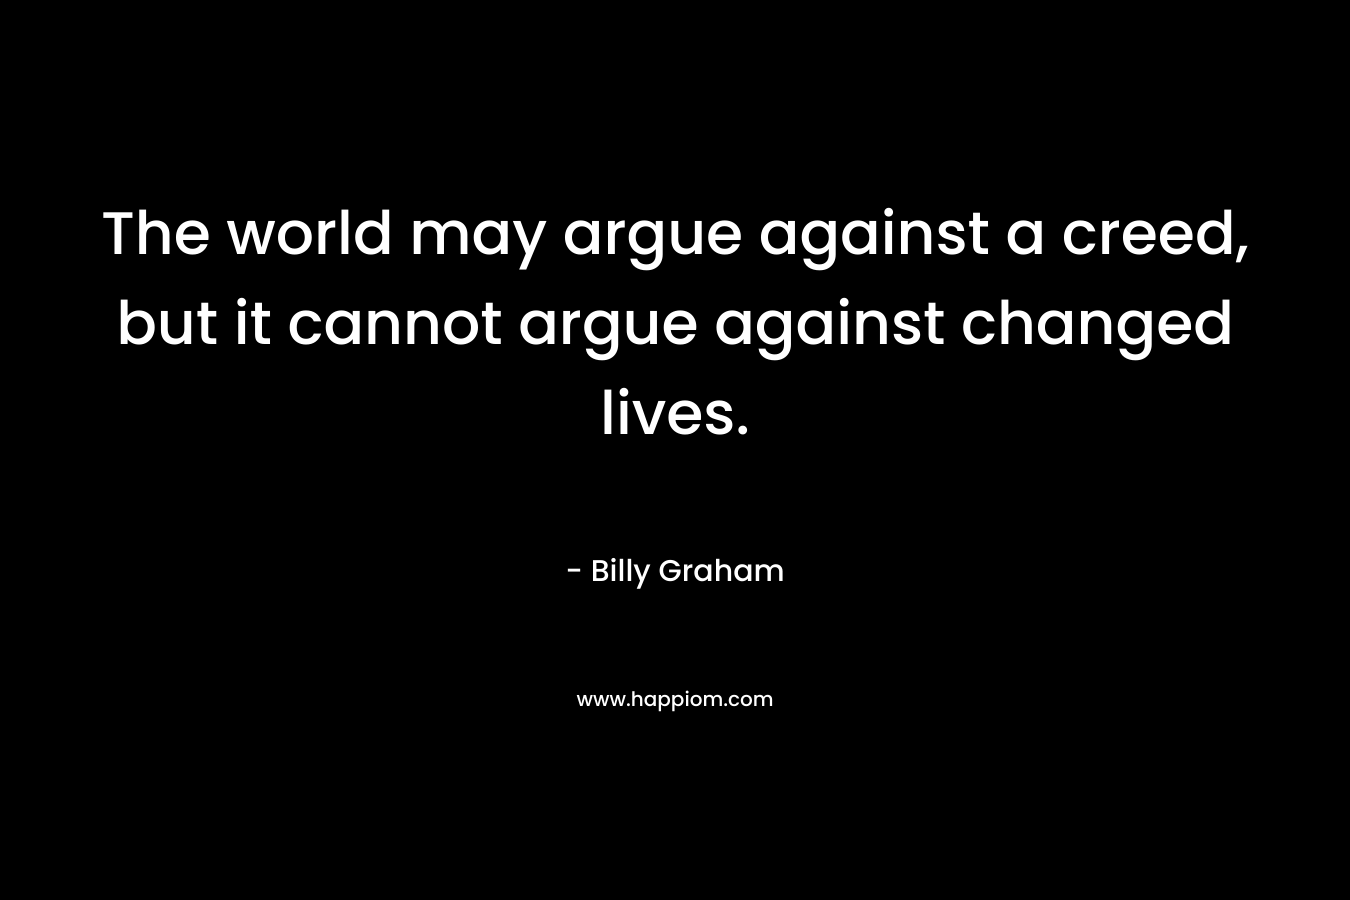 The world may argue against a creed, but it cannot argue against changed lives.